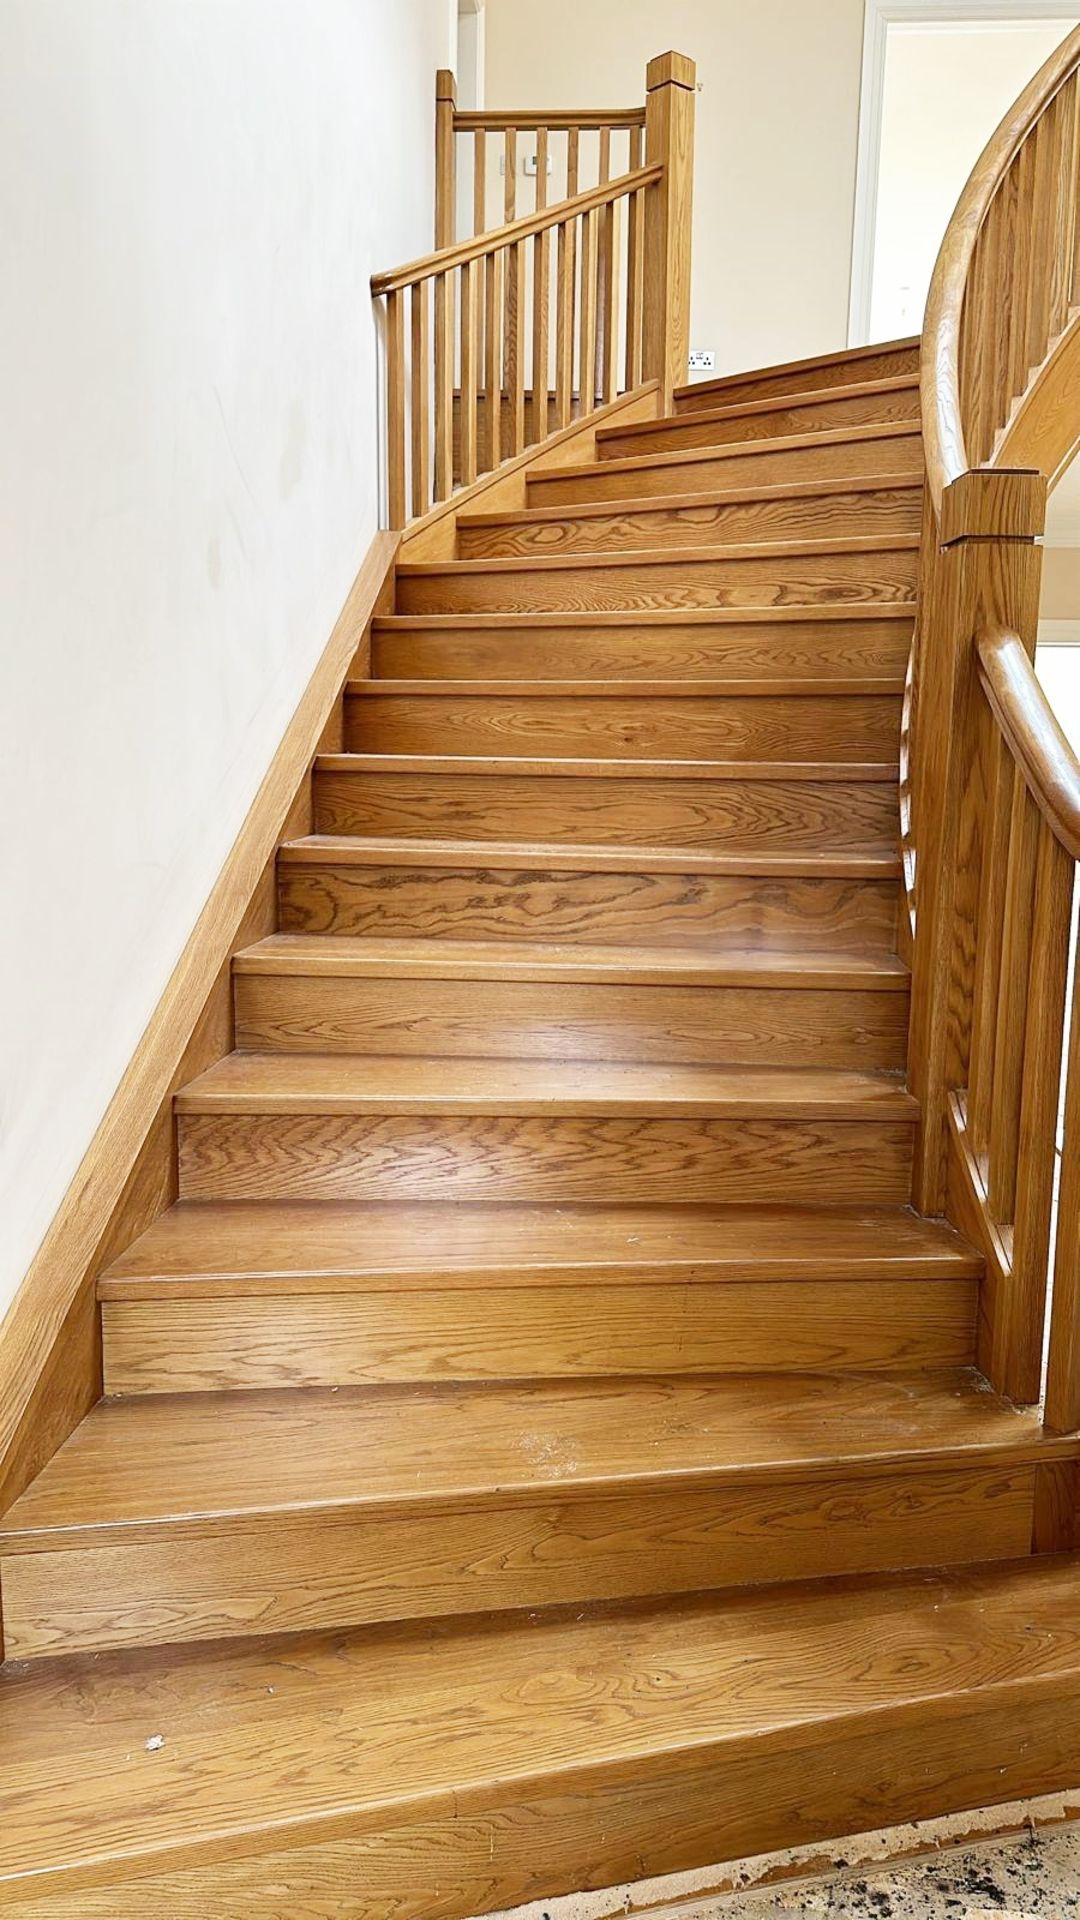 1 x Bespoke Stately 13-Step Curved Wooden Staircase - Image 4 of 5